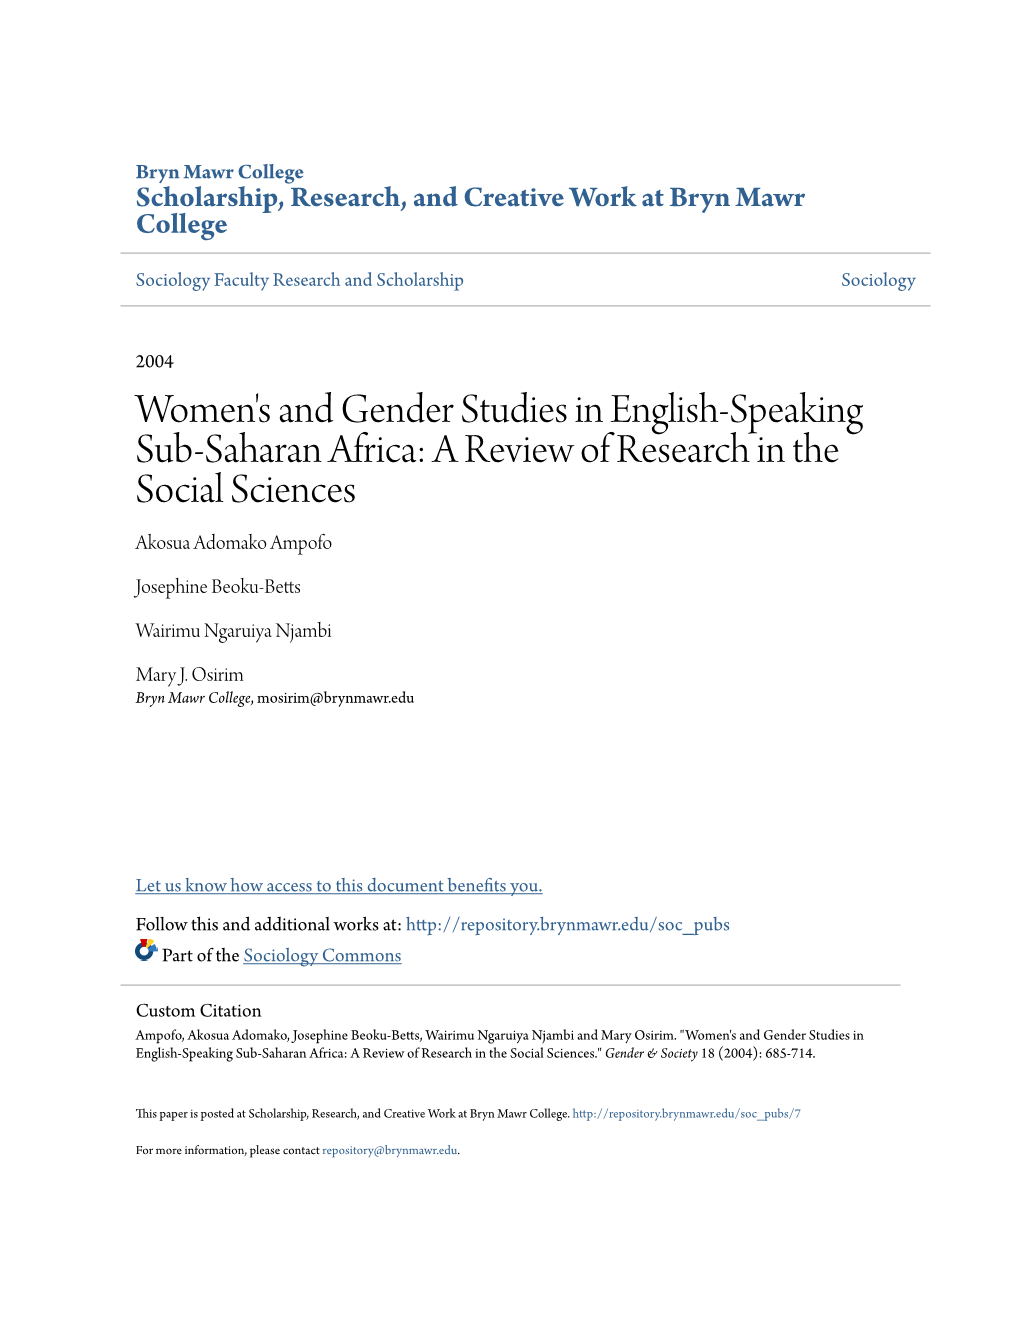 Women's and Gender Studies in English-Speaking Sub-Saharan Africa: a Review of Research in the Social Sciences Akosua Adomako Ampofo